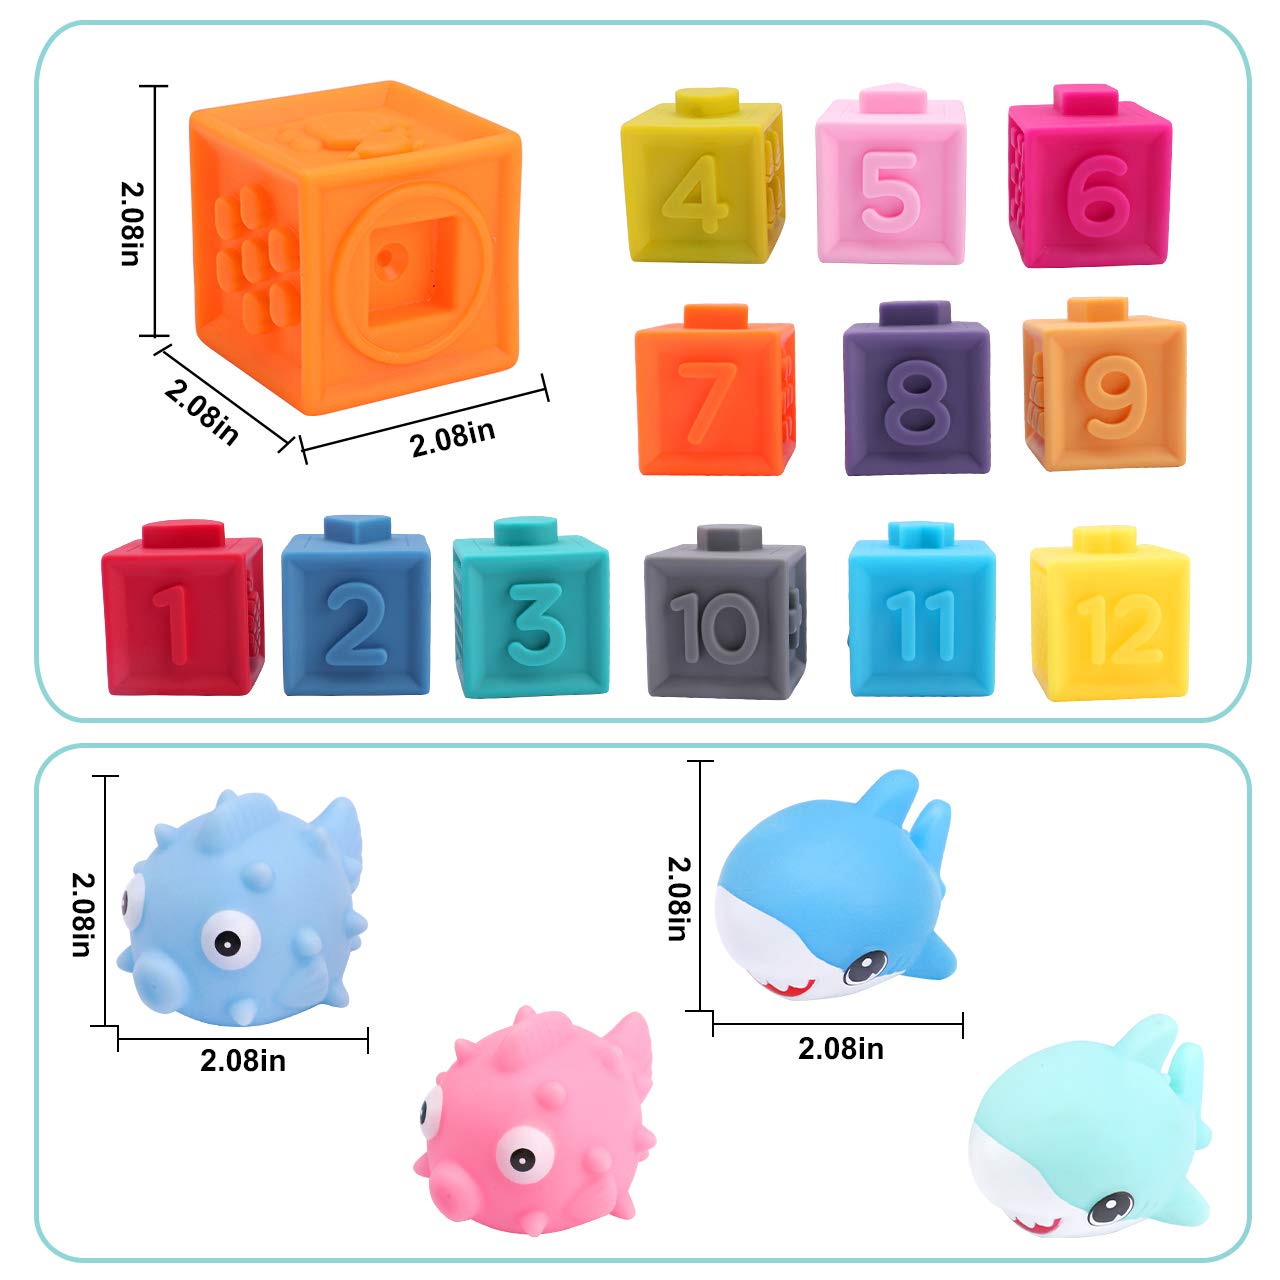 OWNONE 1 Baby Soft Blocks, 16PCS Stacking Building Blocks for Toddlers 1-3, Teething & Sensory Toys for Babies Infant 6 9 10 12 18 Months, Learning Developmental Toys for Boys & Girls 1 2 3 Years Old